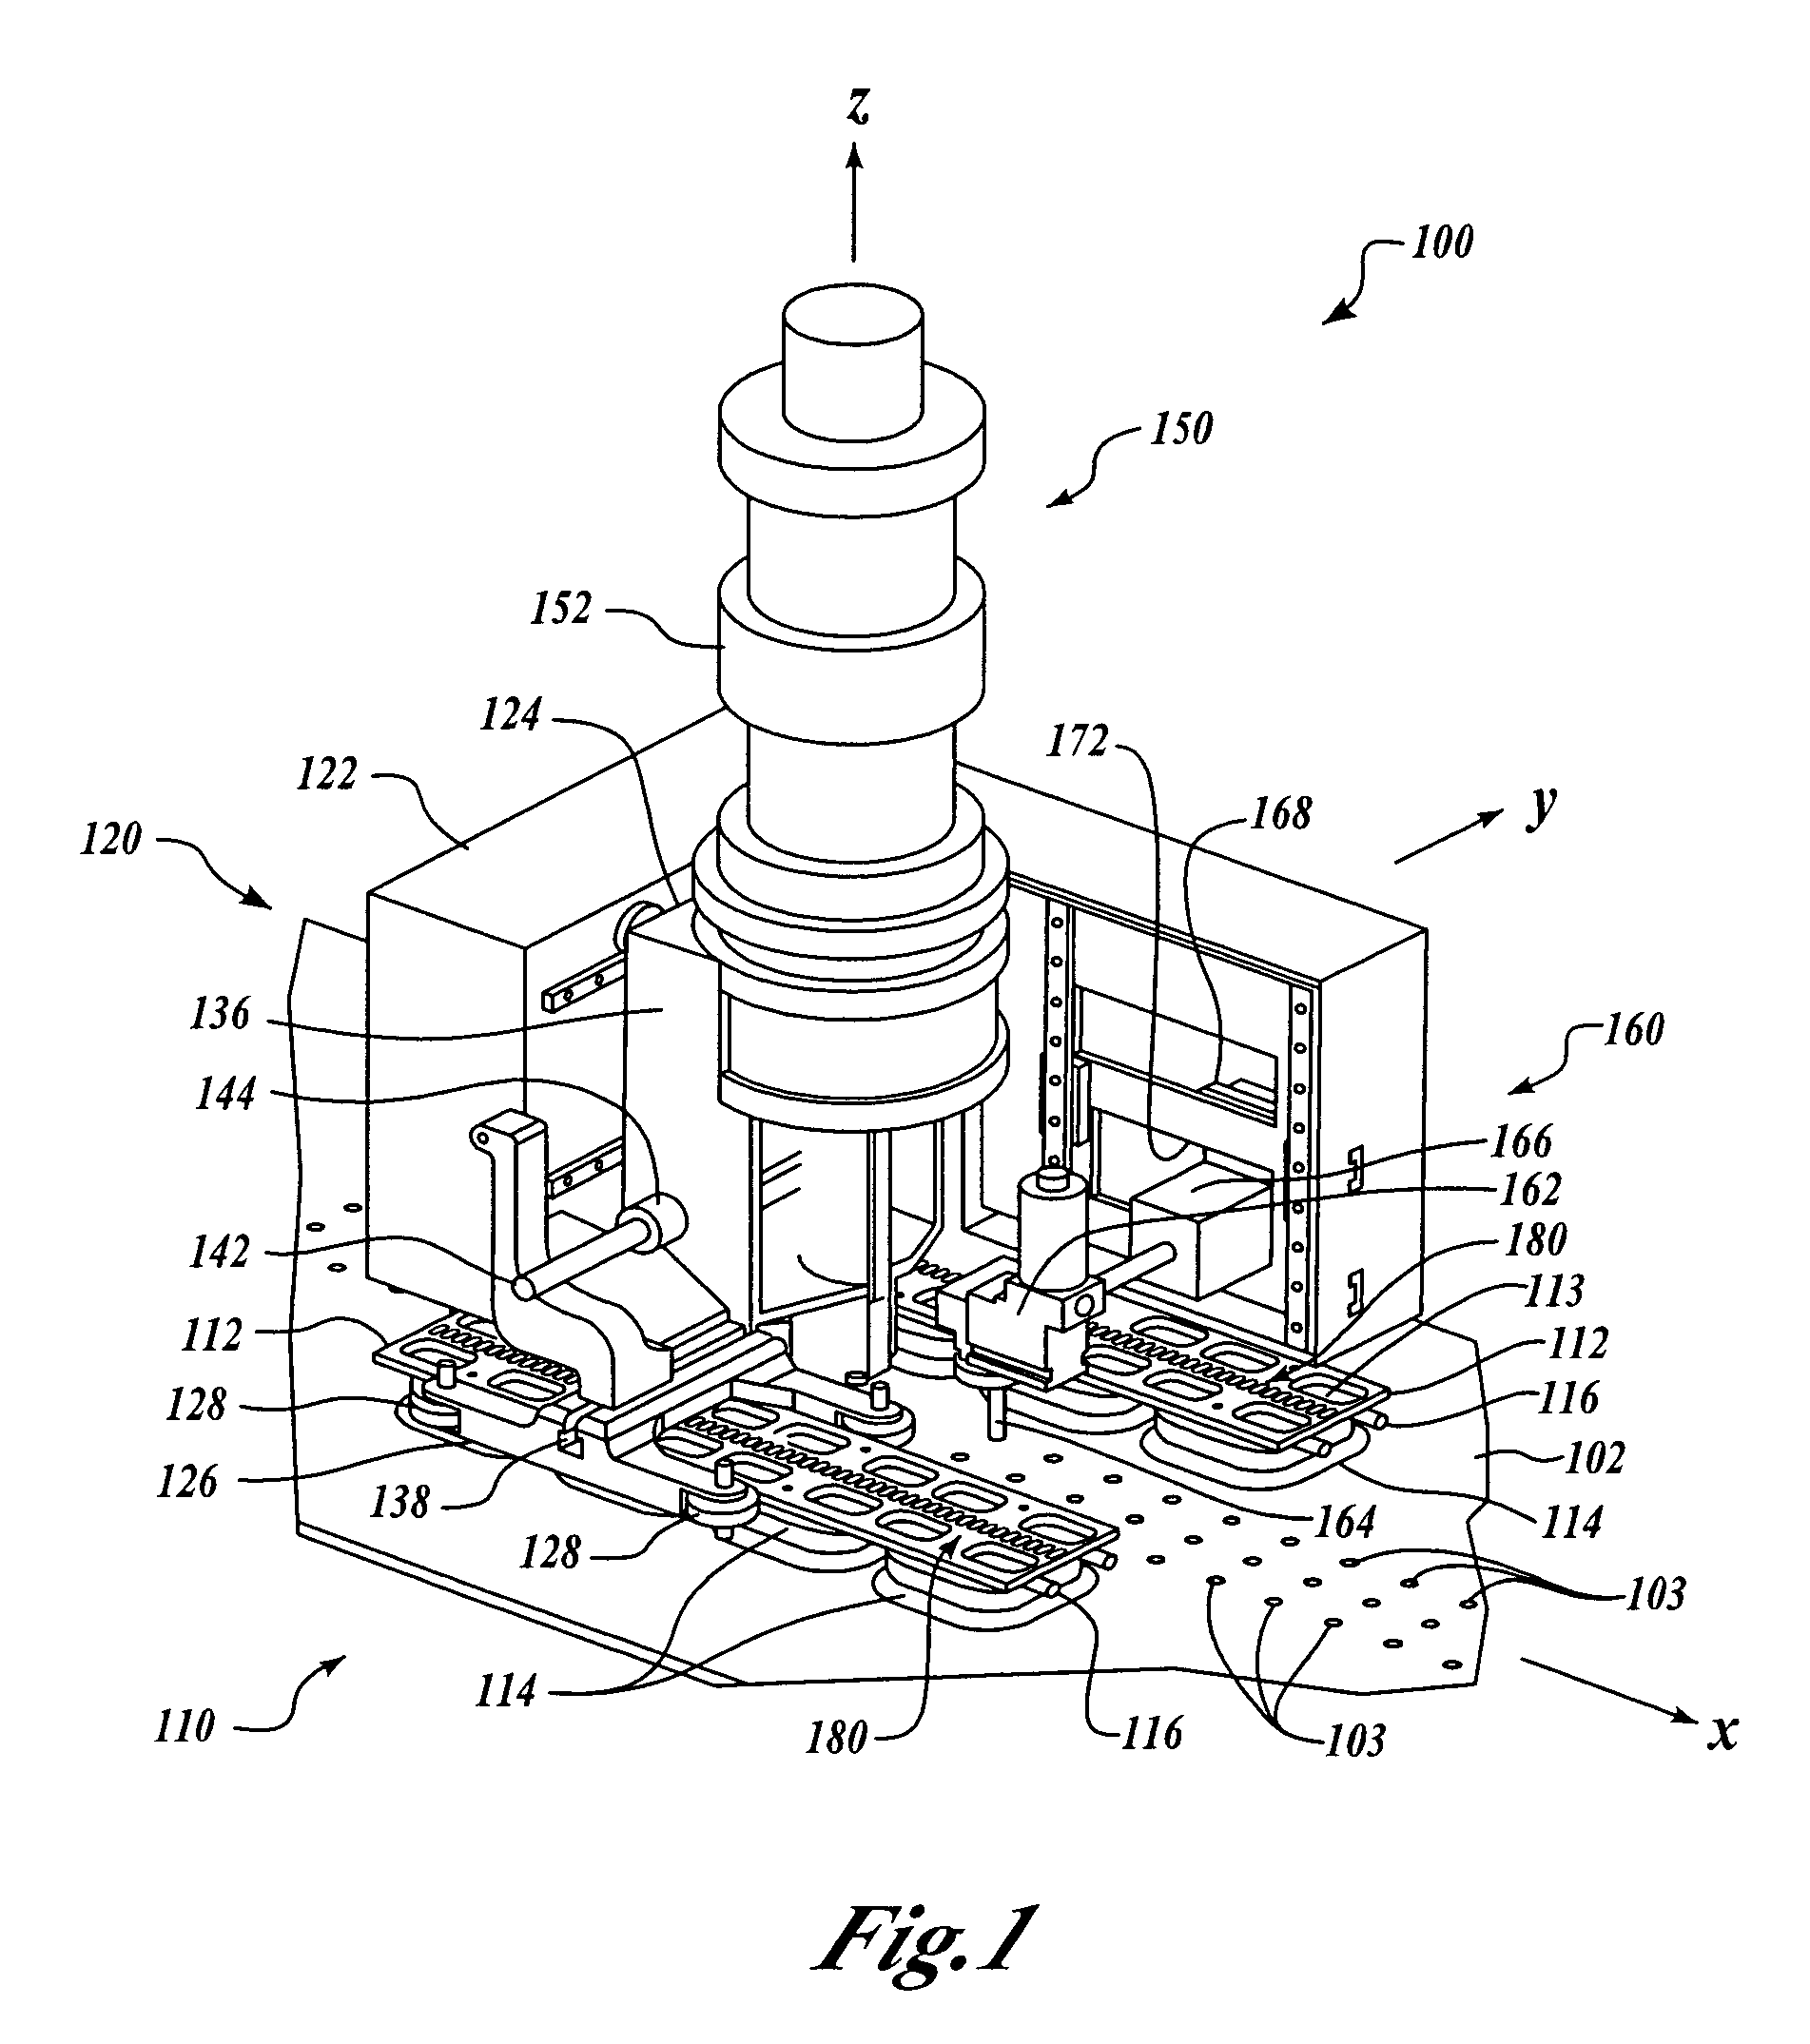 Methods and apparatus for track members having a neutral-axis rack